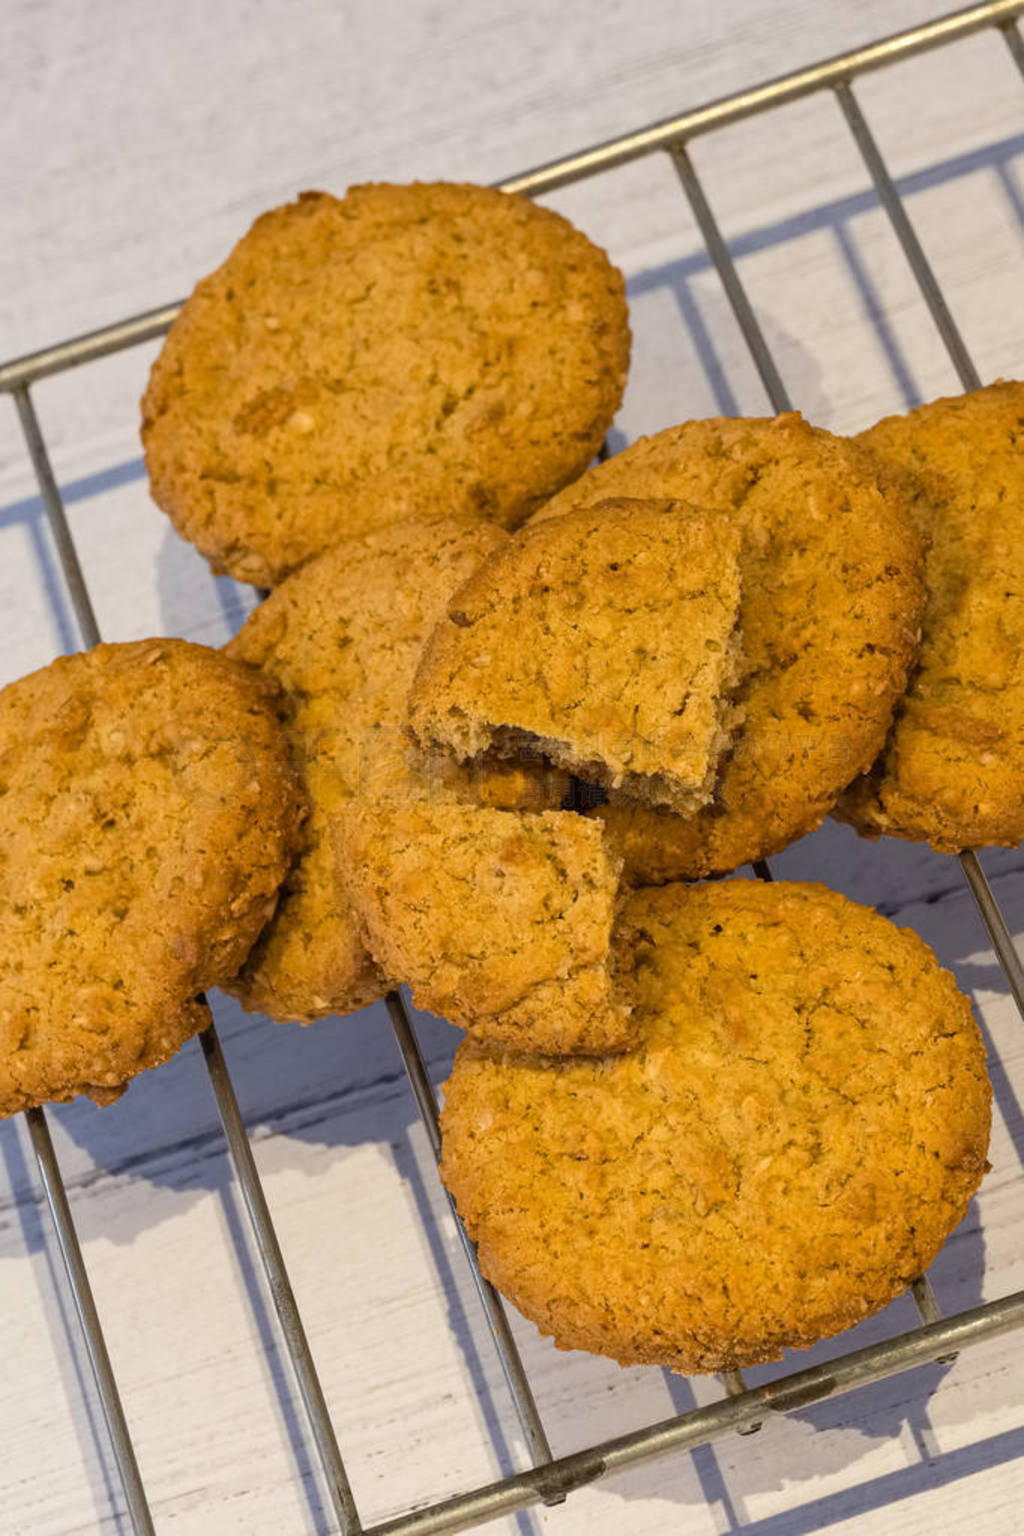 Crumbly Oatmeal Biscuits Just Out of the Oven